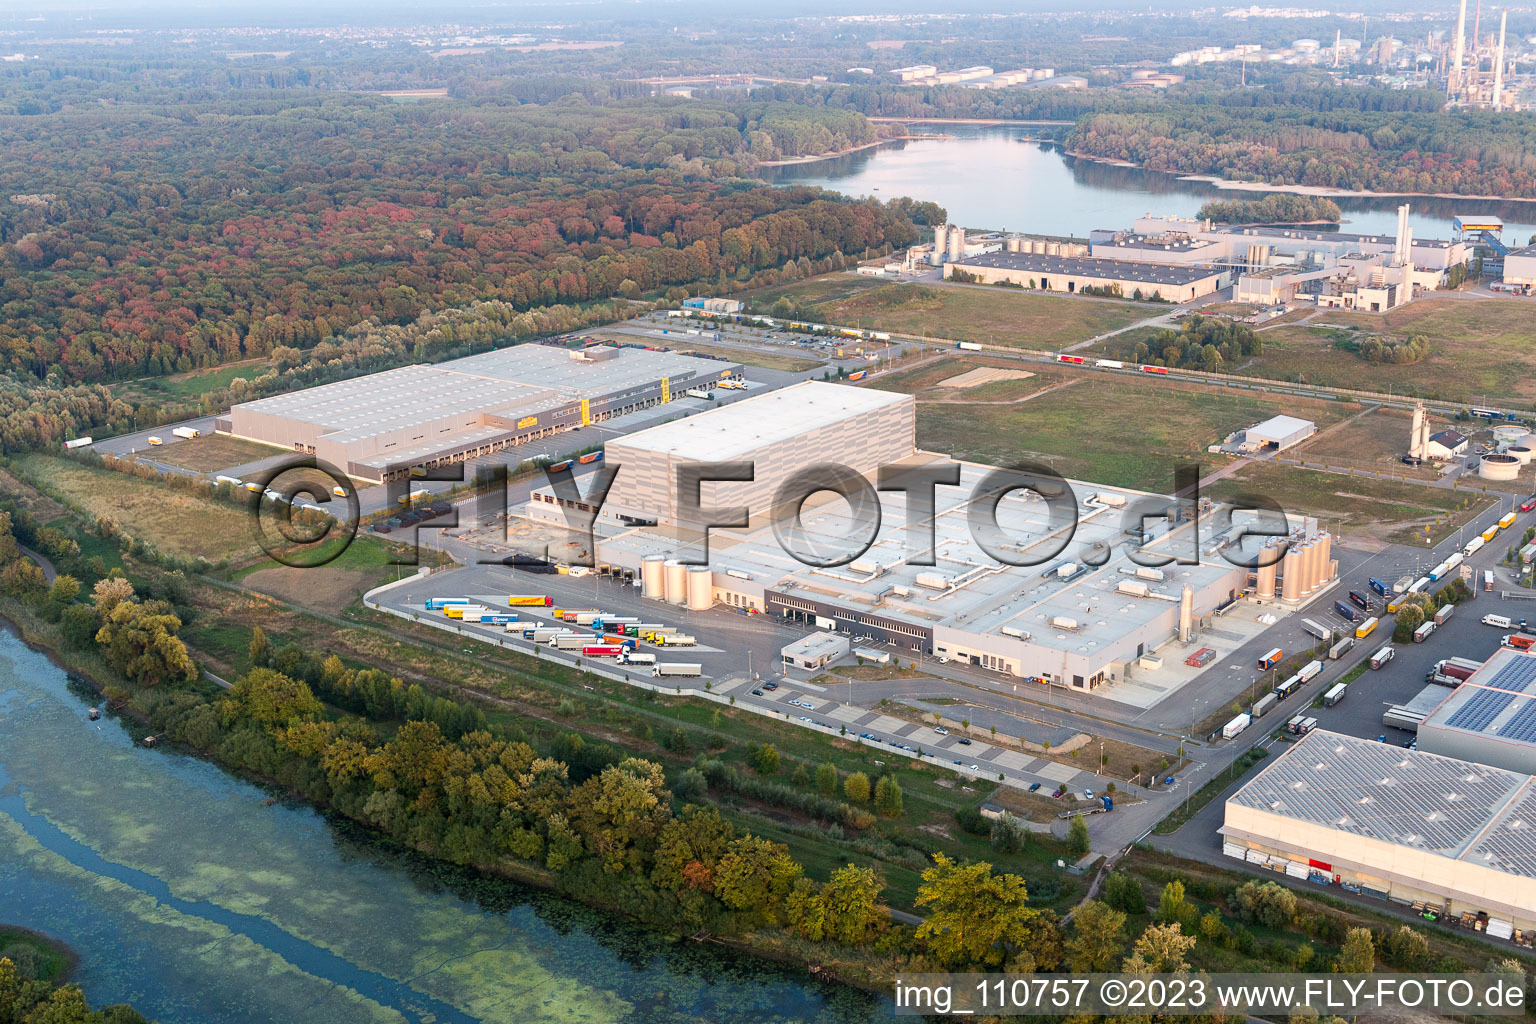 Oberwald industrial area in Wörth am Rhein in the state Rhineland-Palatinate, Germany seen from a drone